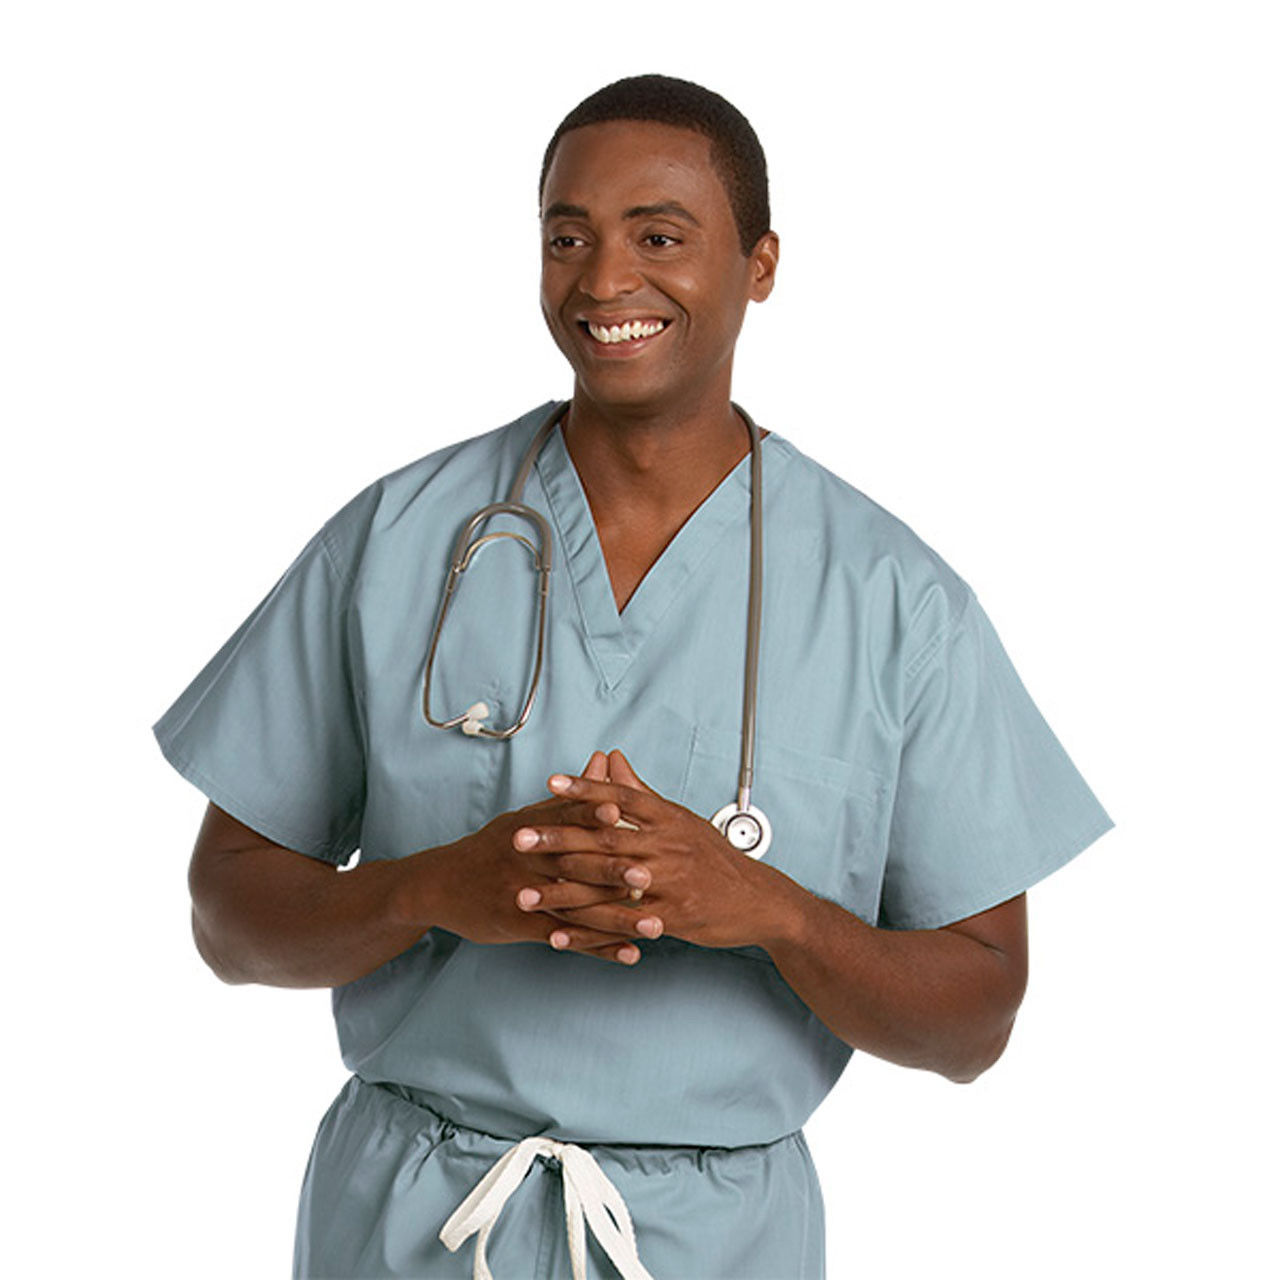 What is the construction of the seams in these surgical scrubs?